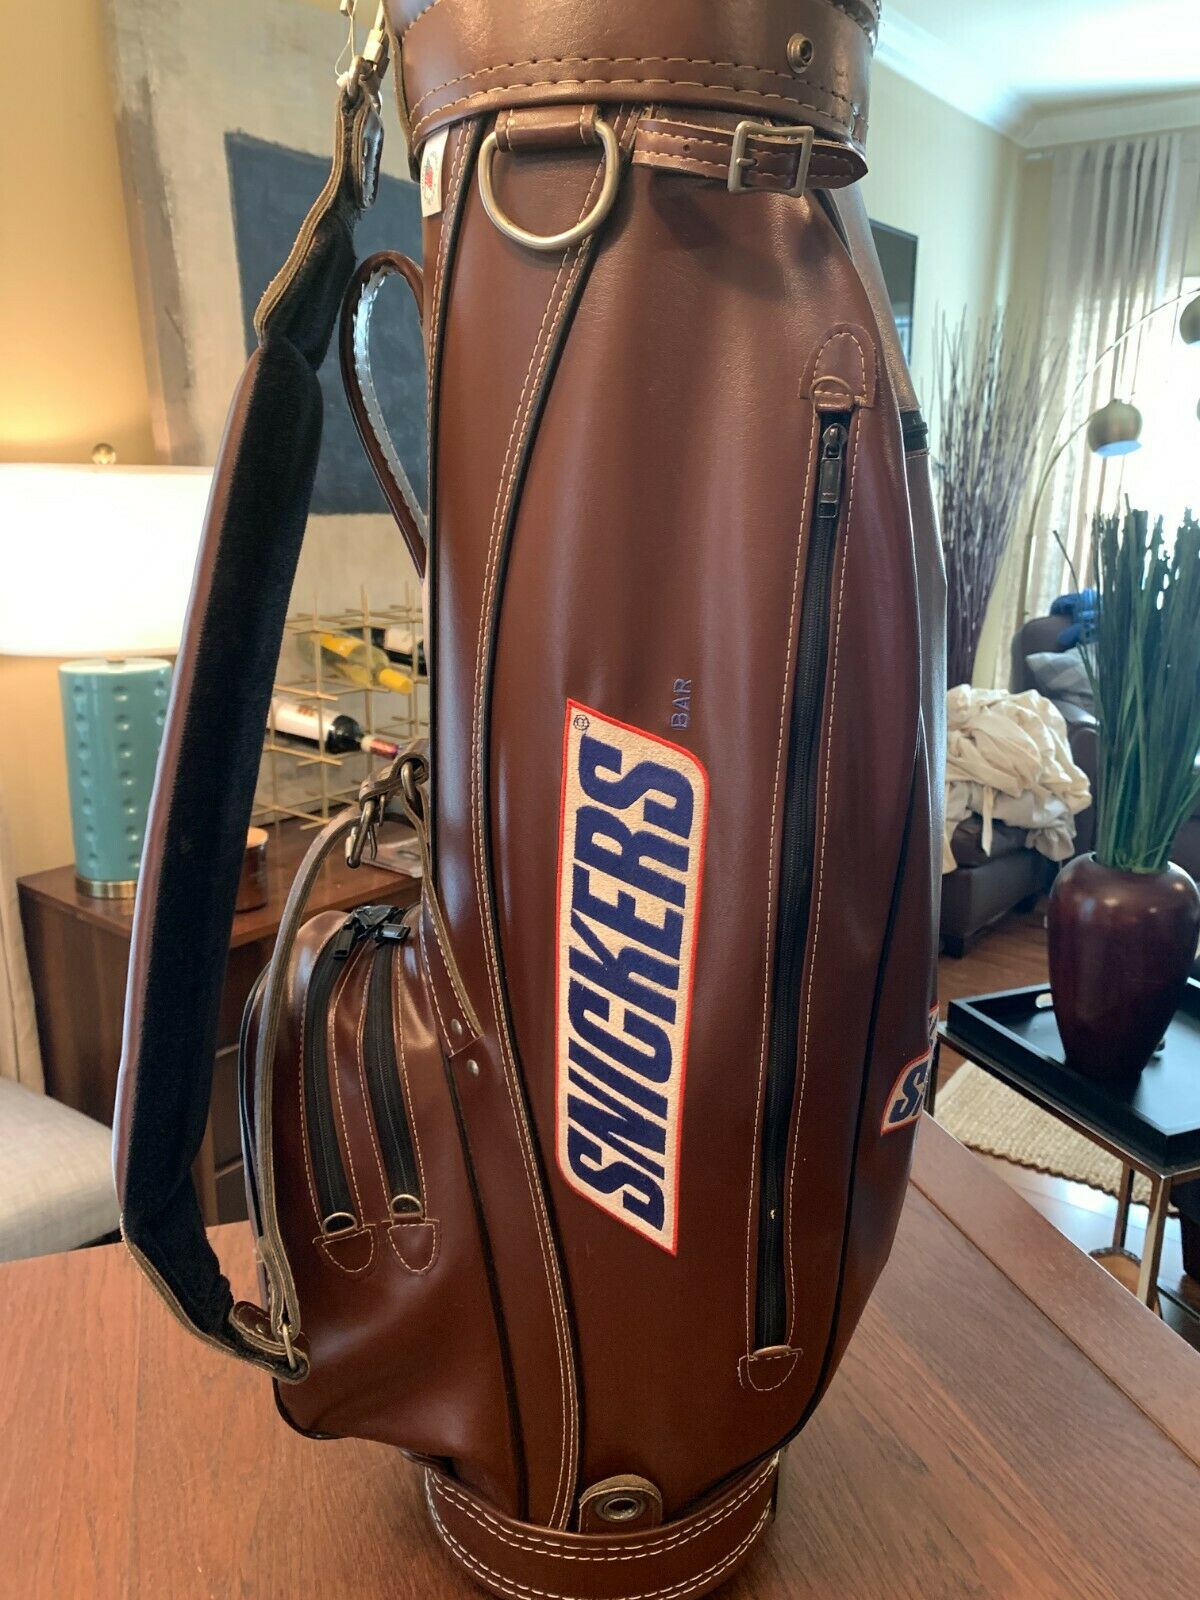 robmillertime on X: The perfect retro golf bag does not exi